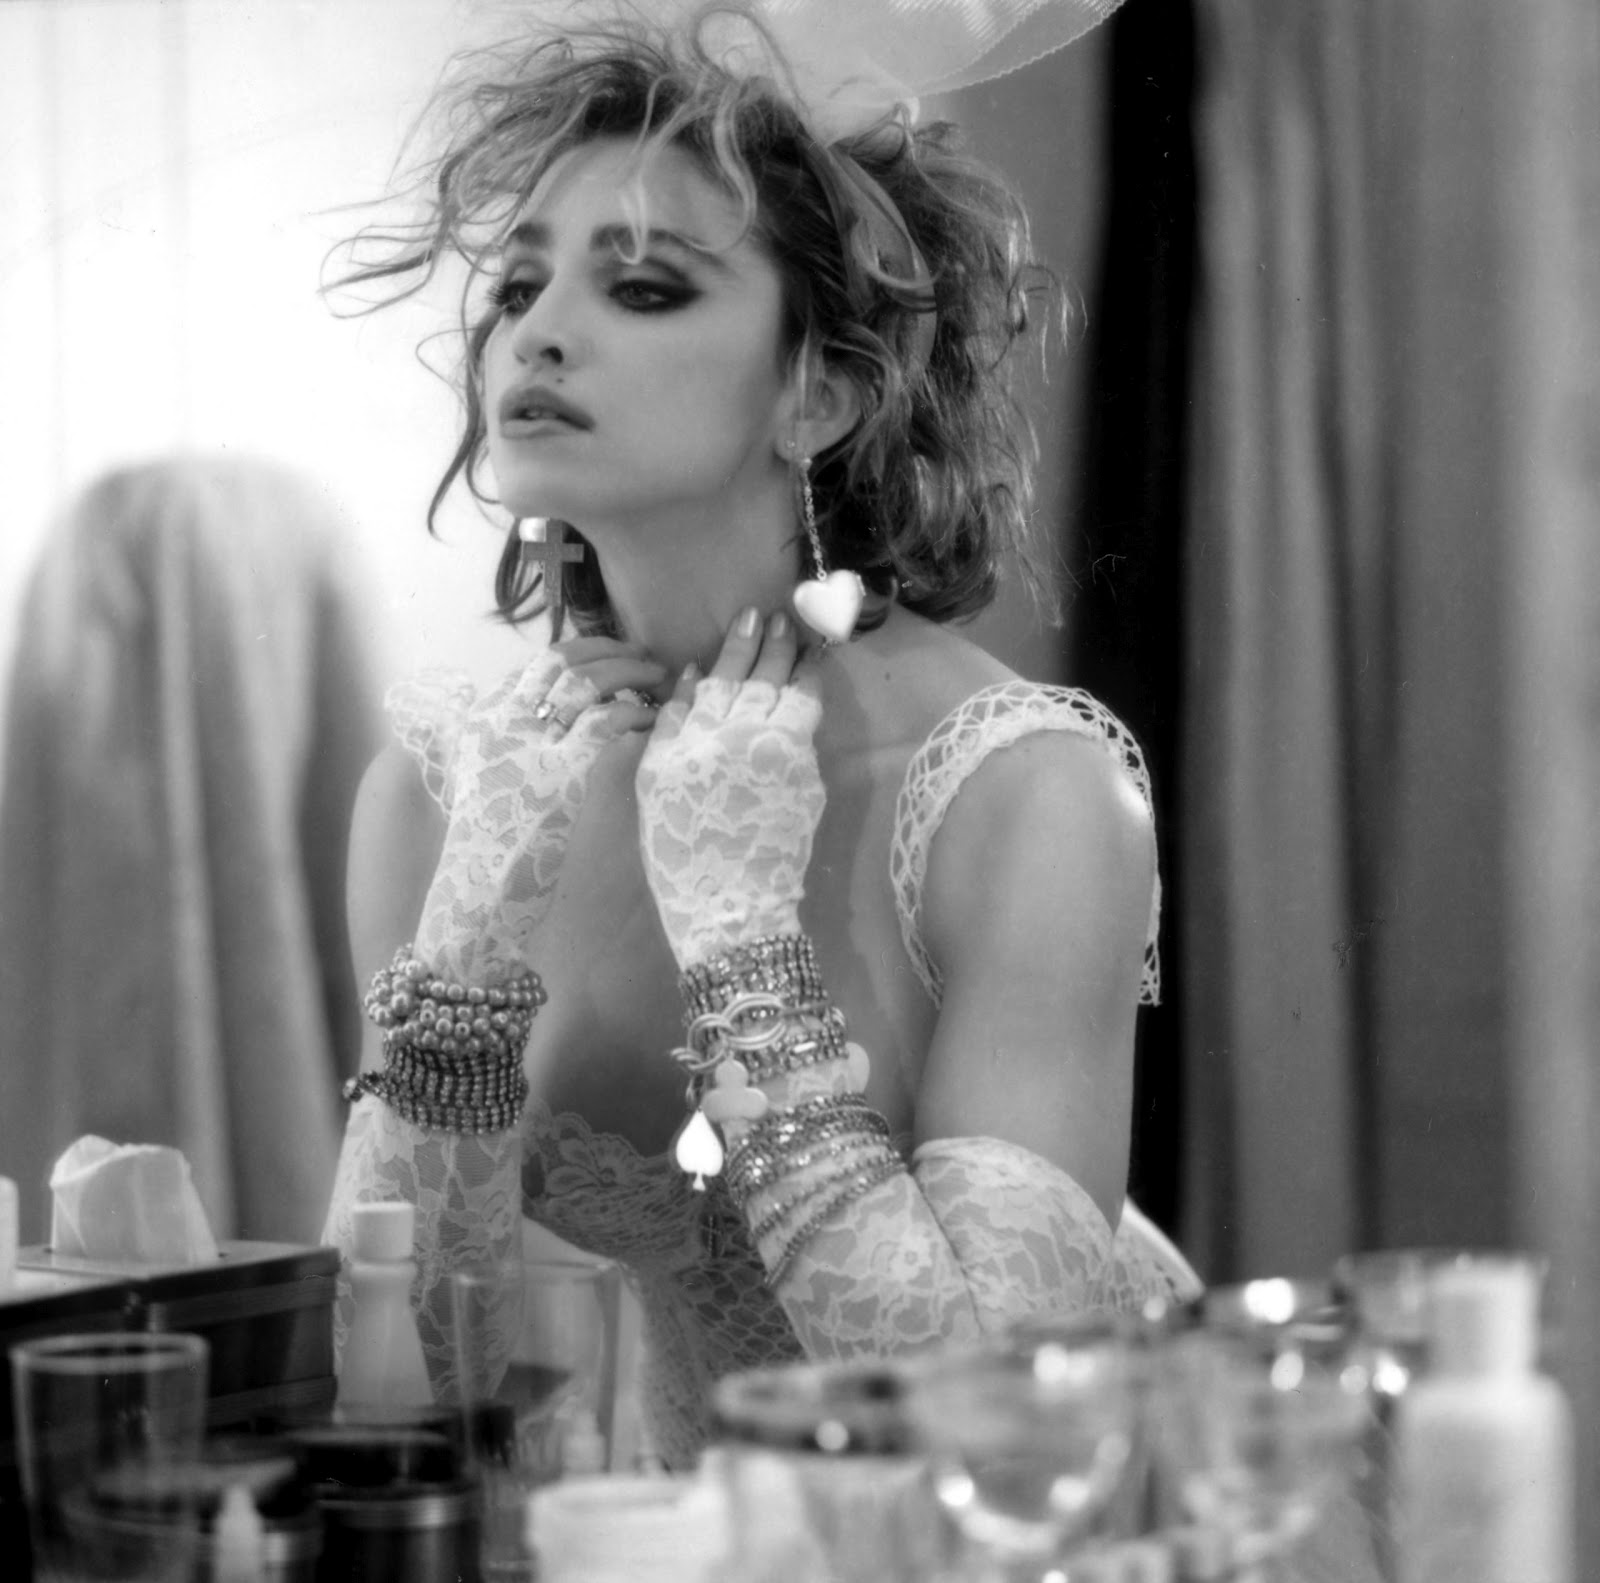 http://4.bp.blogspot.com/-LuITOUUOw0E/T8IN9fHc-DI/AAAAAAAAEUI/7kQXF8ZTGM4/s1600/1984-Madonna-by-Steven-Meisel-for-Like-a-Virgin-Cover-Album-Session-madonna-10126958-2560-2533+(1).jpg